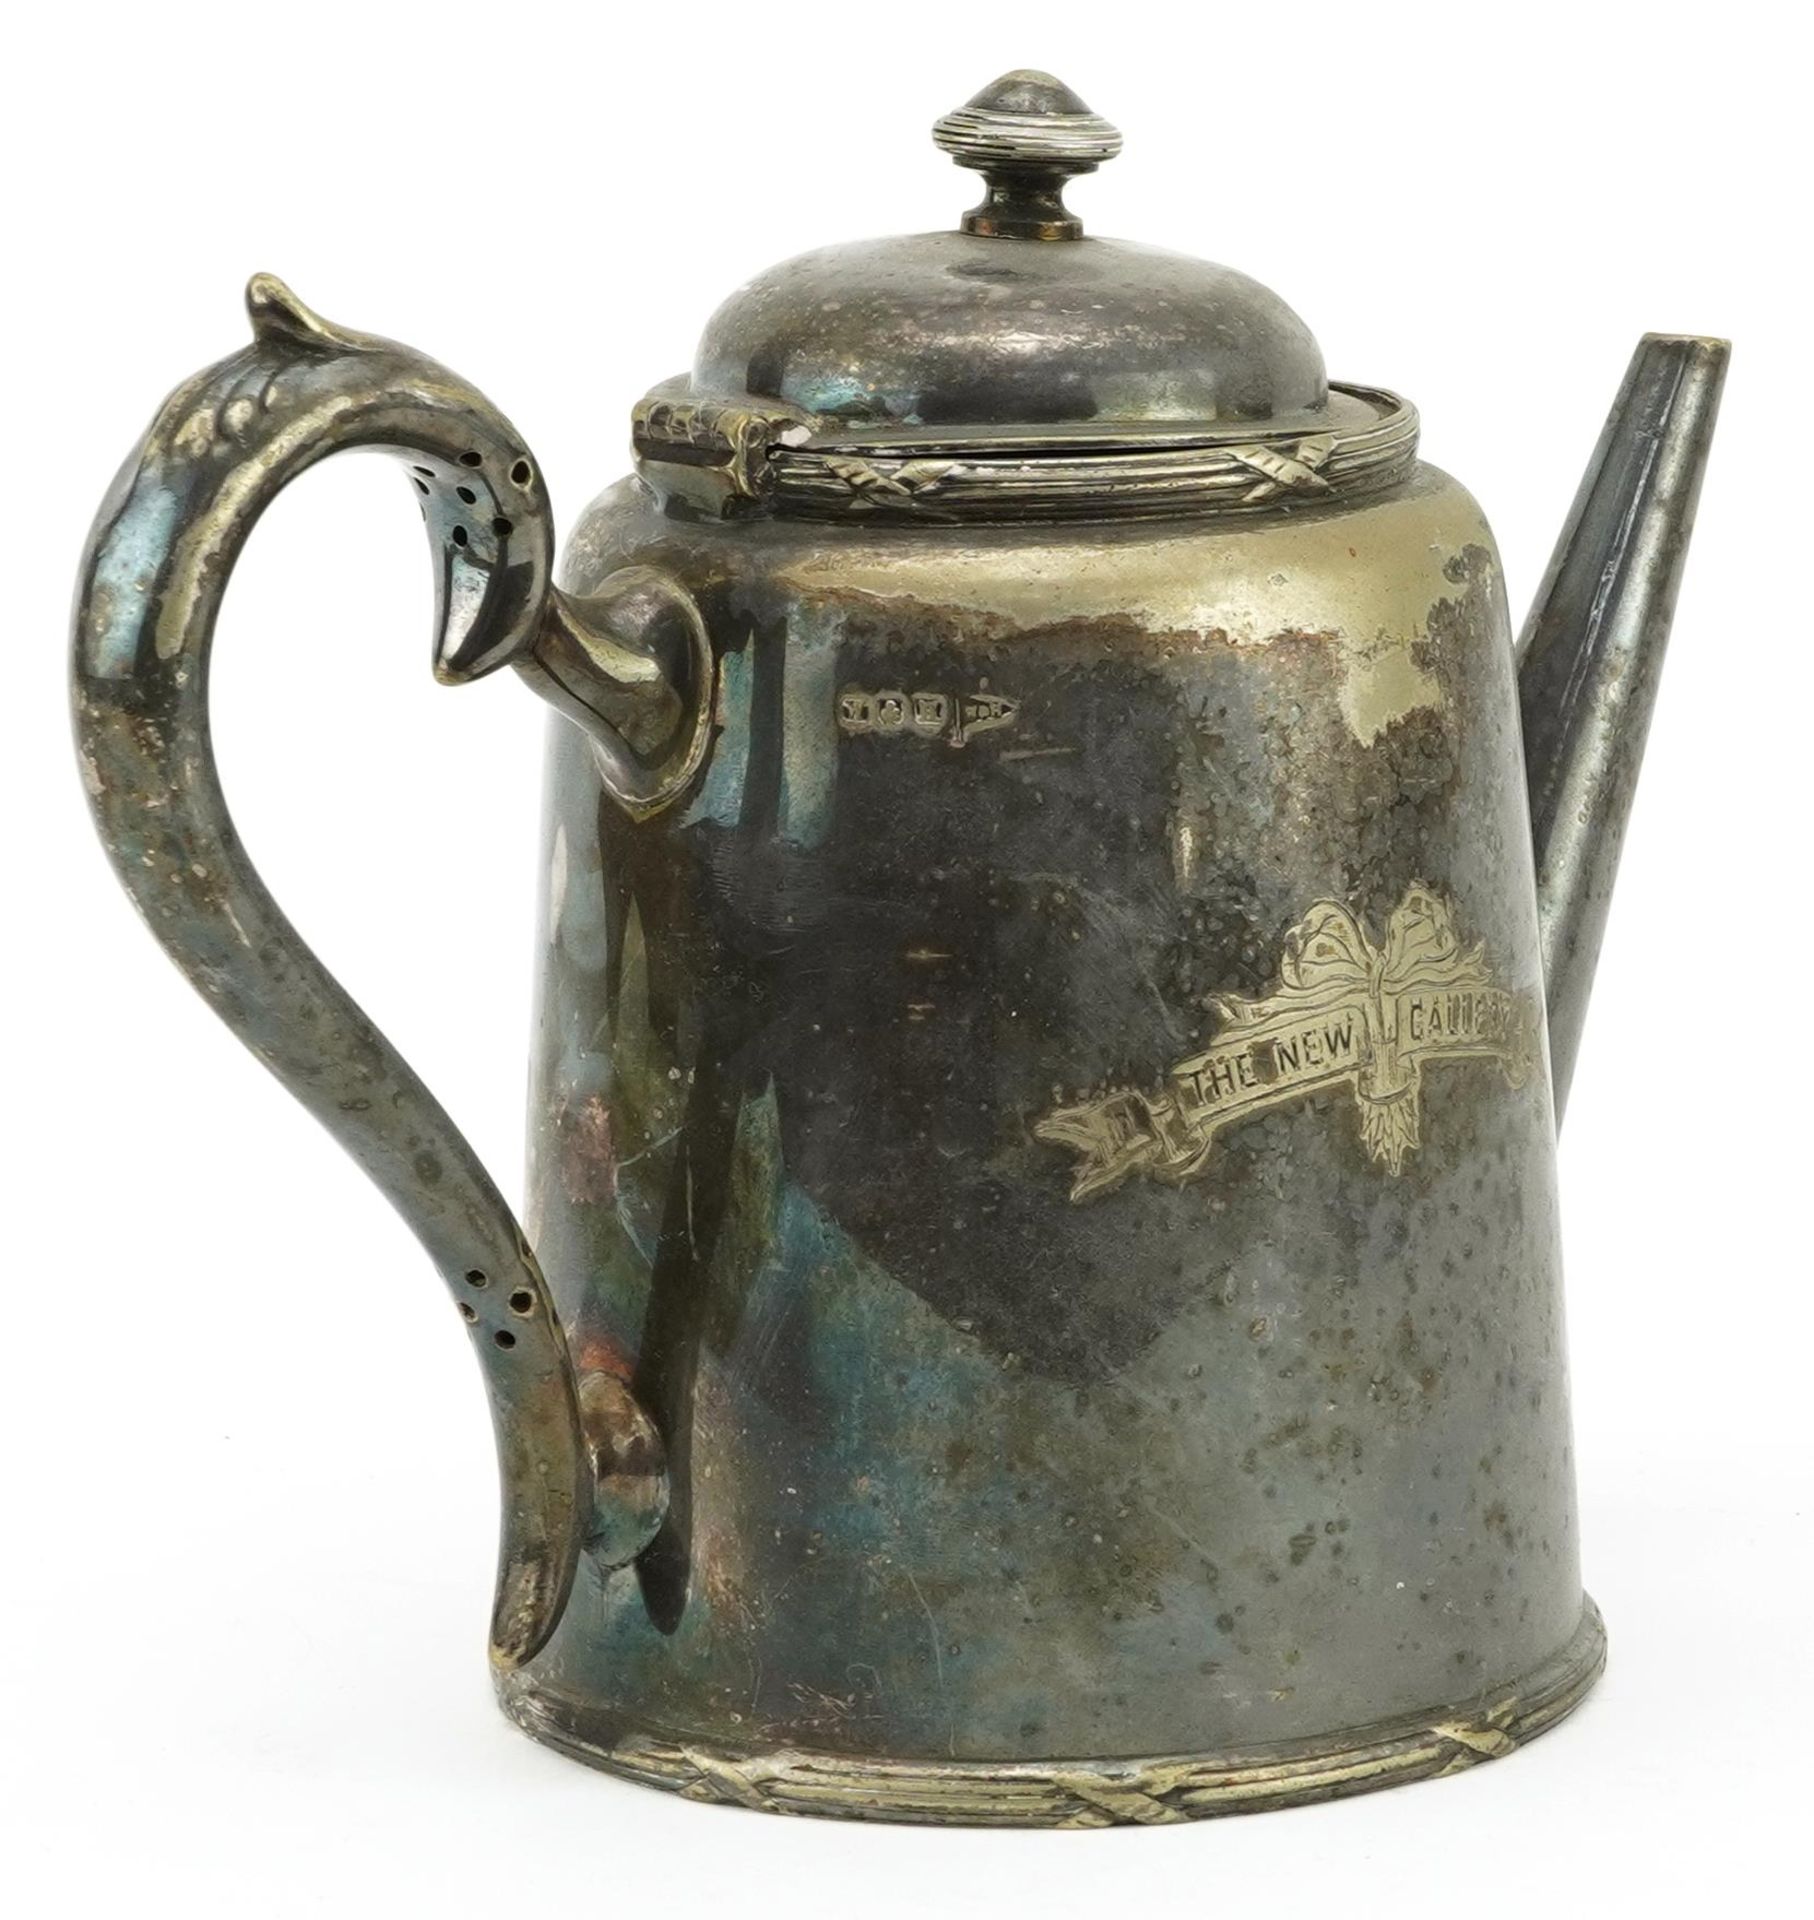 Advertising interest The New Gallery silver plated hot water pot by Walker & Hall, 19cm high : For - Image 3 of 5